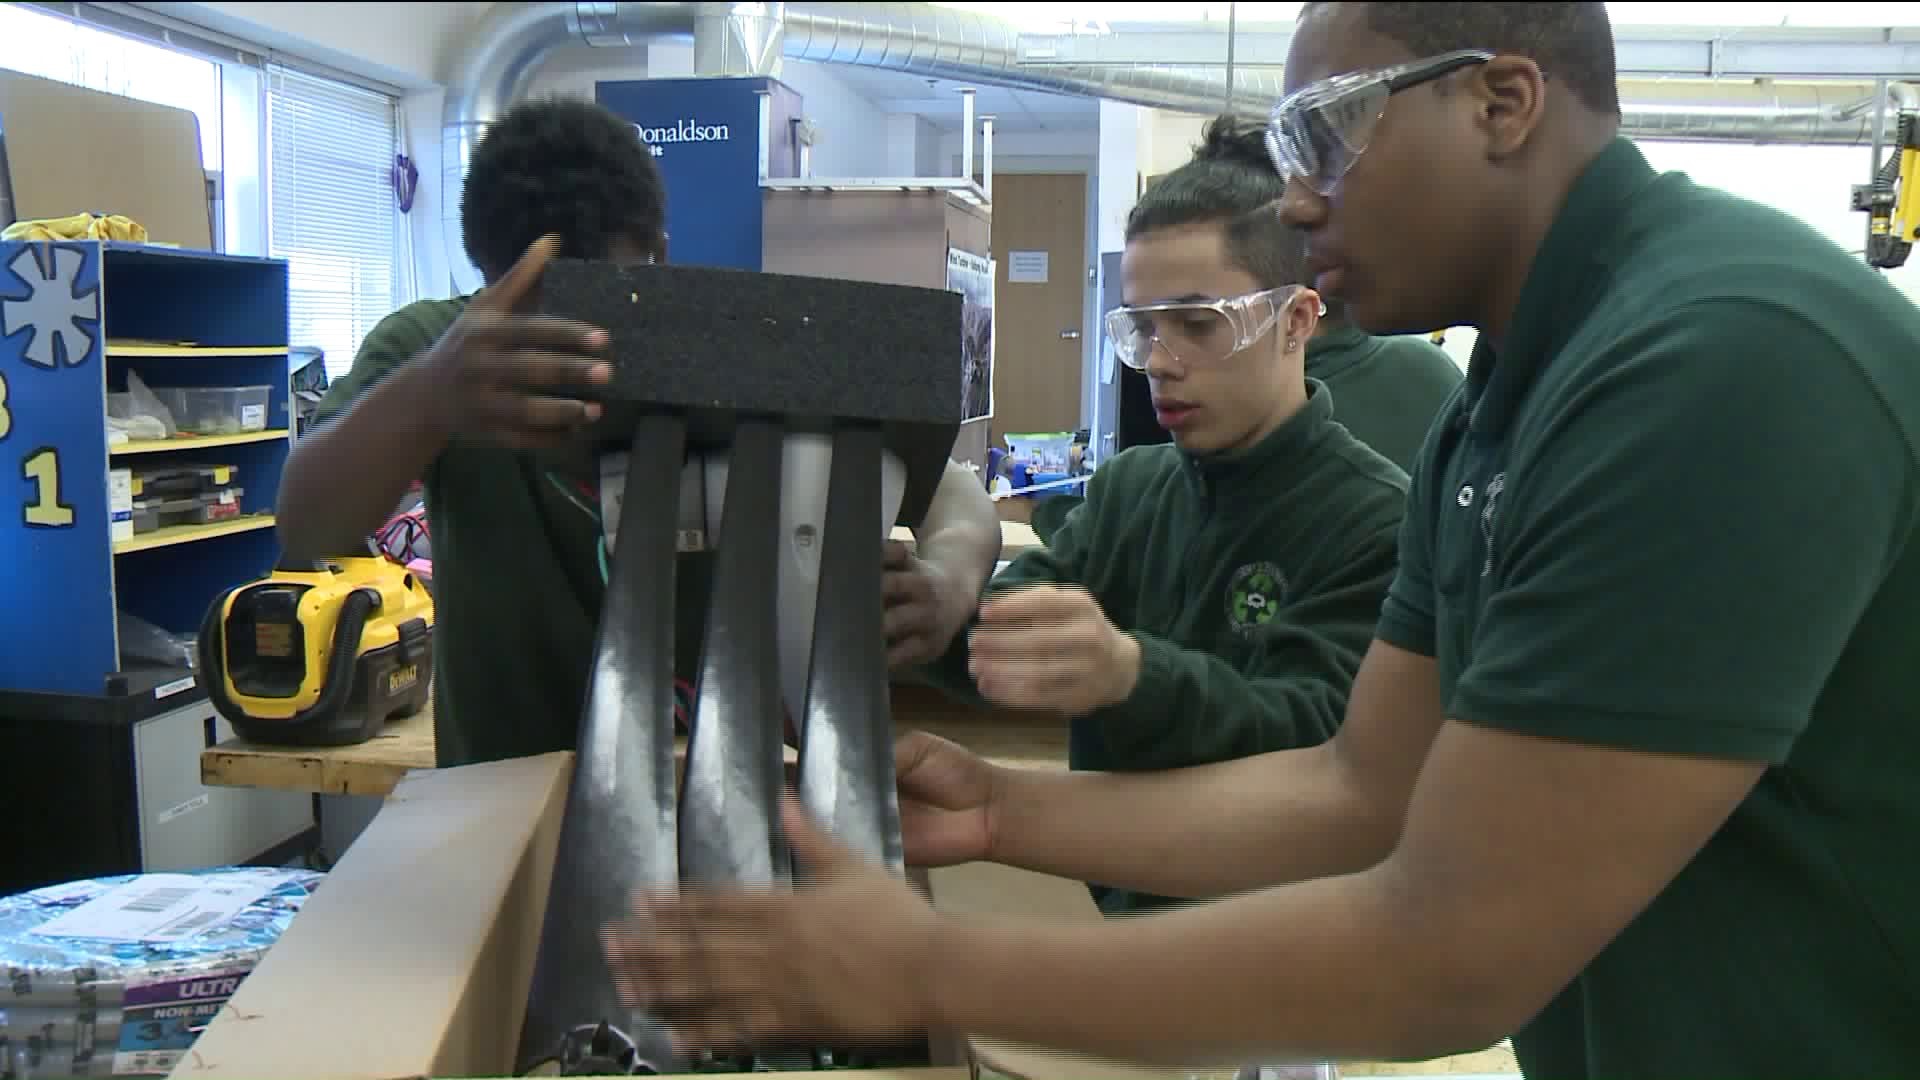 Teen powered technology up and running in Hartford